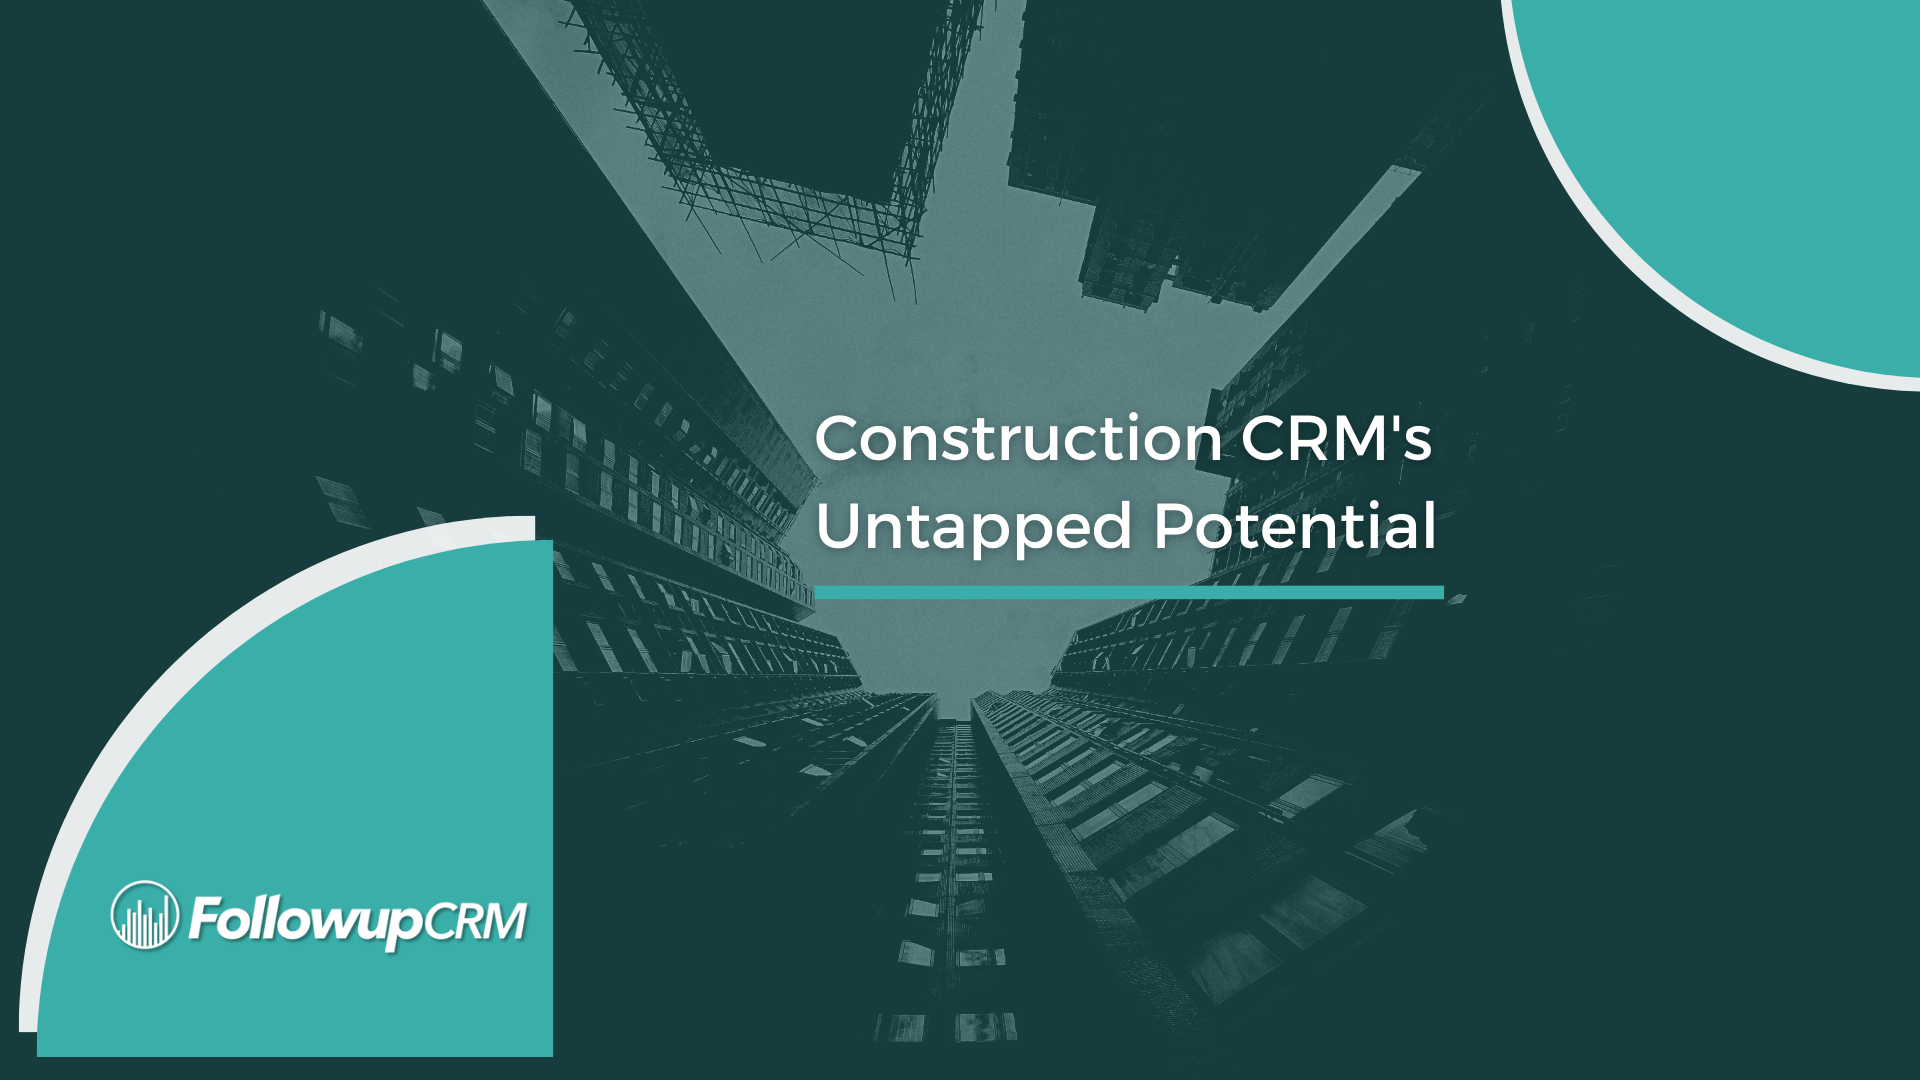 Construction CRM's Untapped Potential